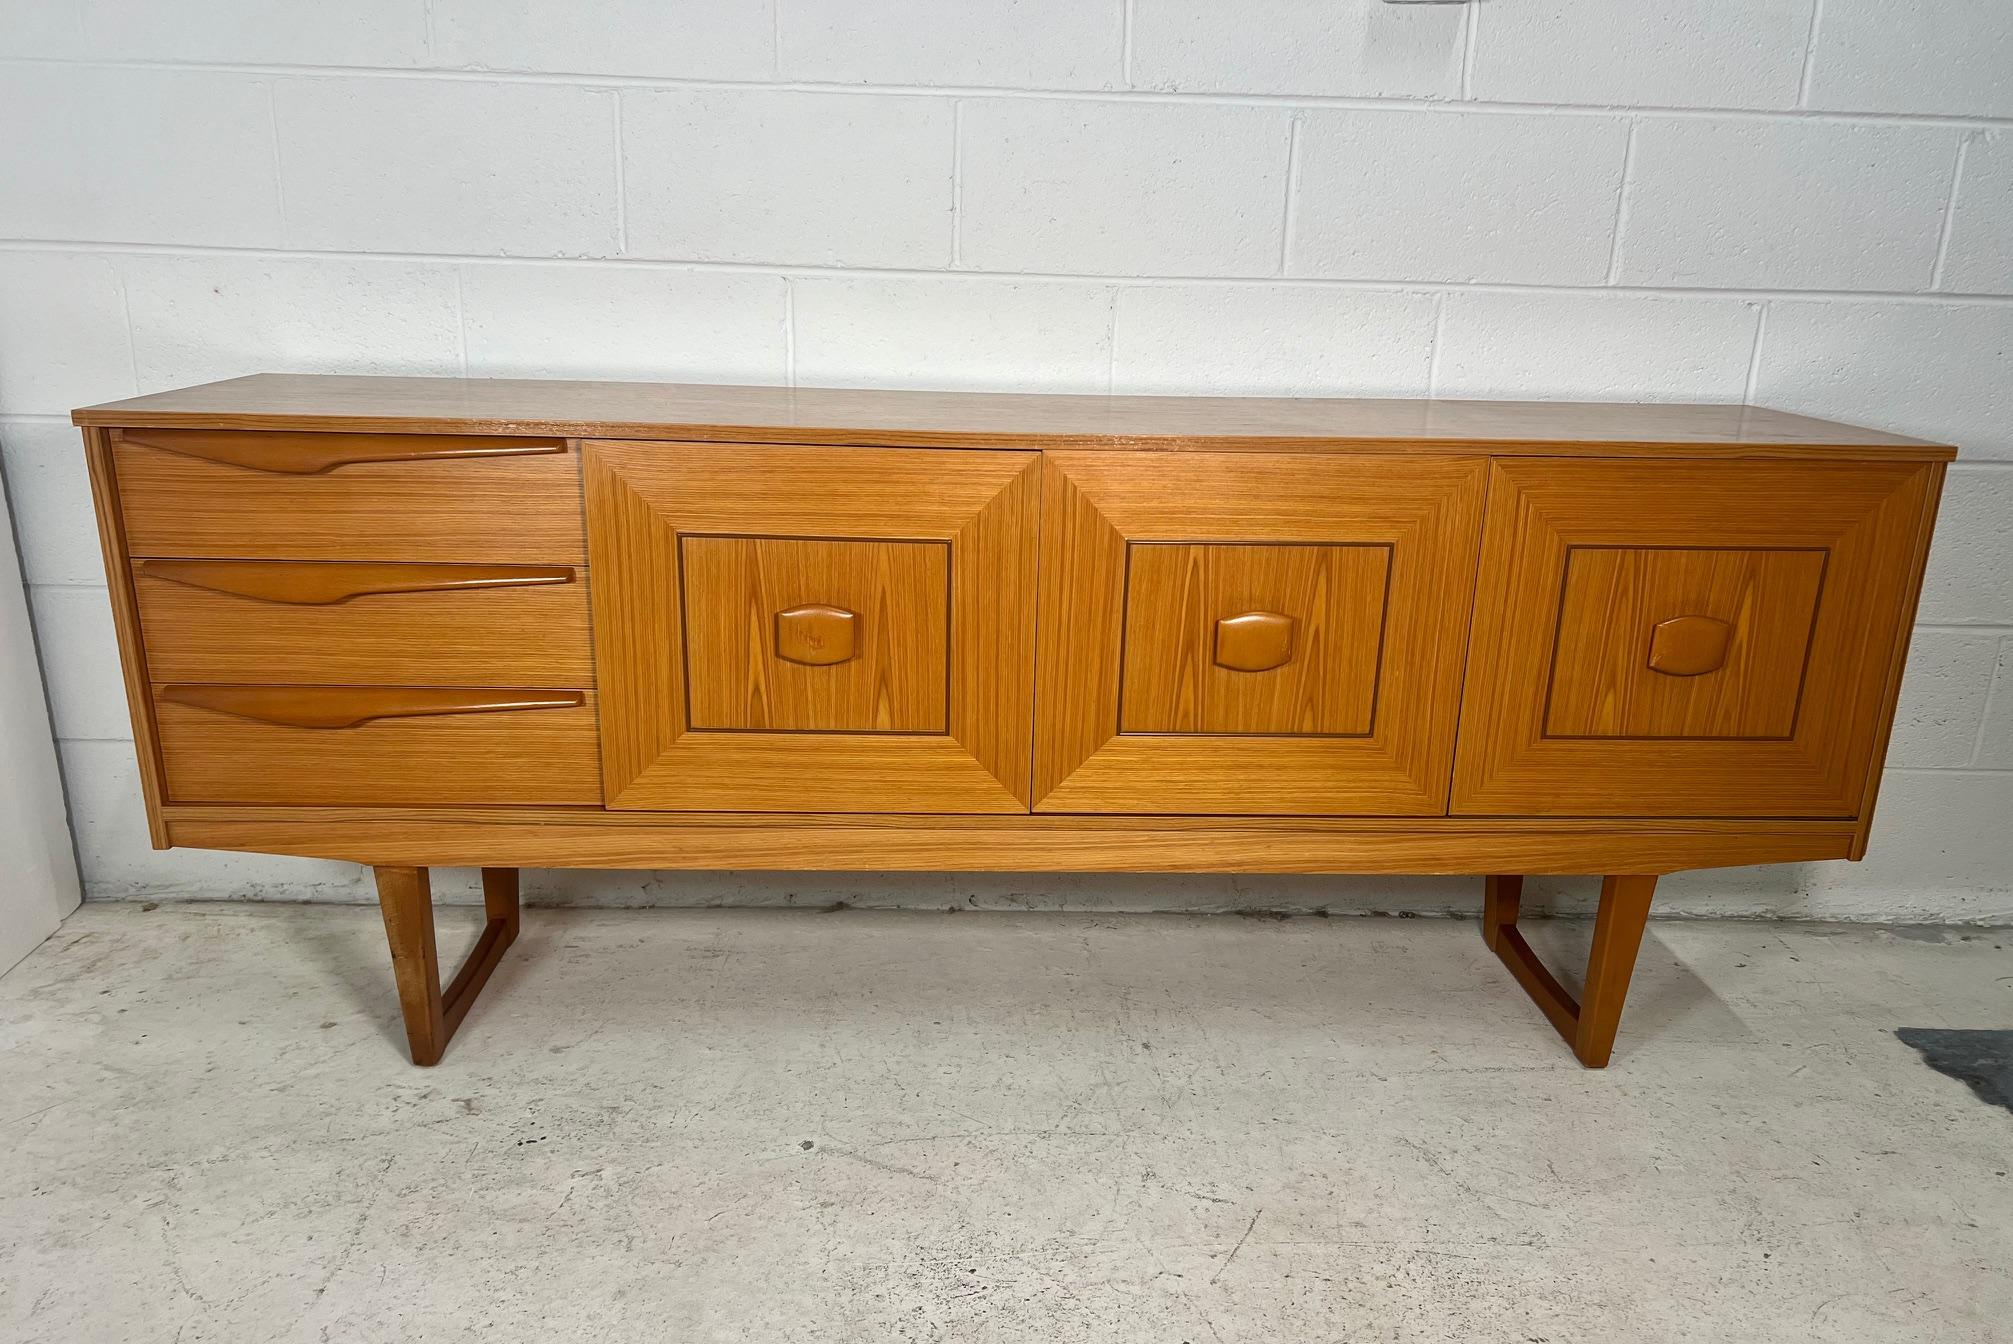 Outstanding teak credenza by Stateroom. Featuring 3 drawers on the left, drop down door bar on the right and a cabinet with removable shelves in the middle. Very good condition overall, some scratches on handles as shown in photos. Small stain on